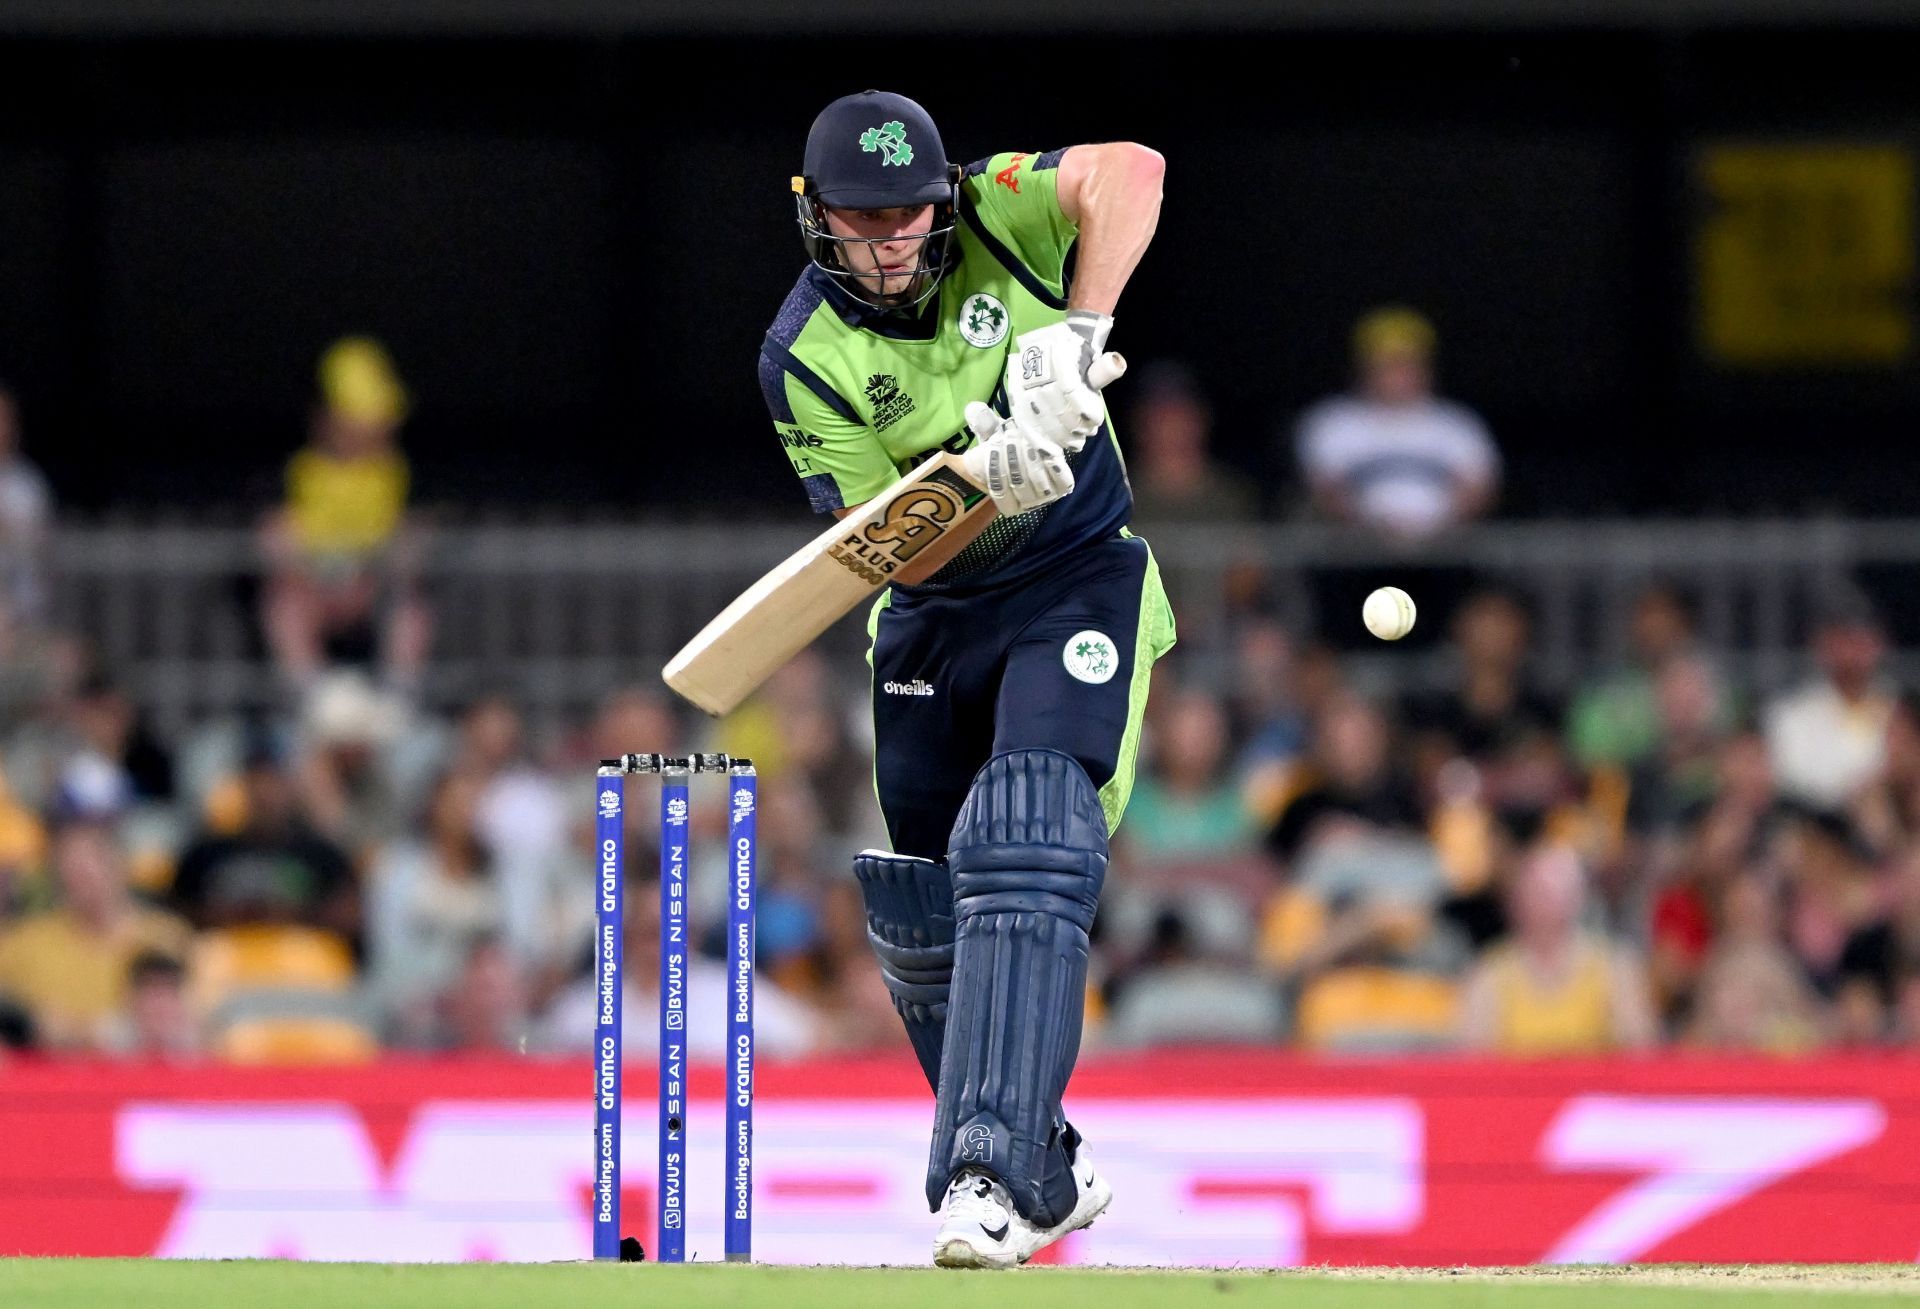 Lorcan Tucker played a fantastic knock against Australia (Image: Getty)